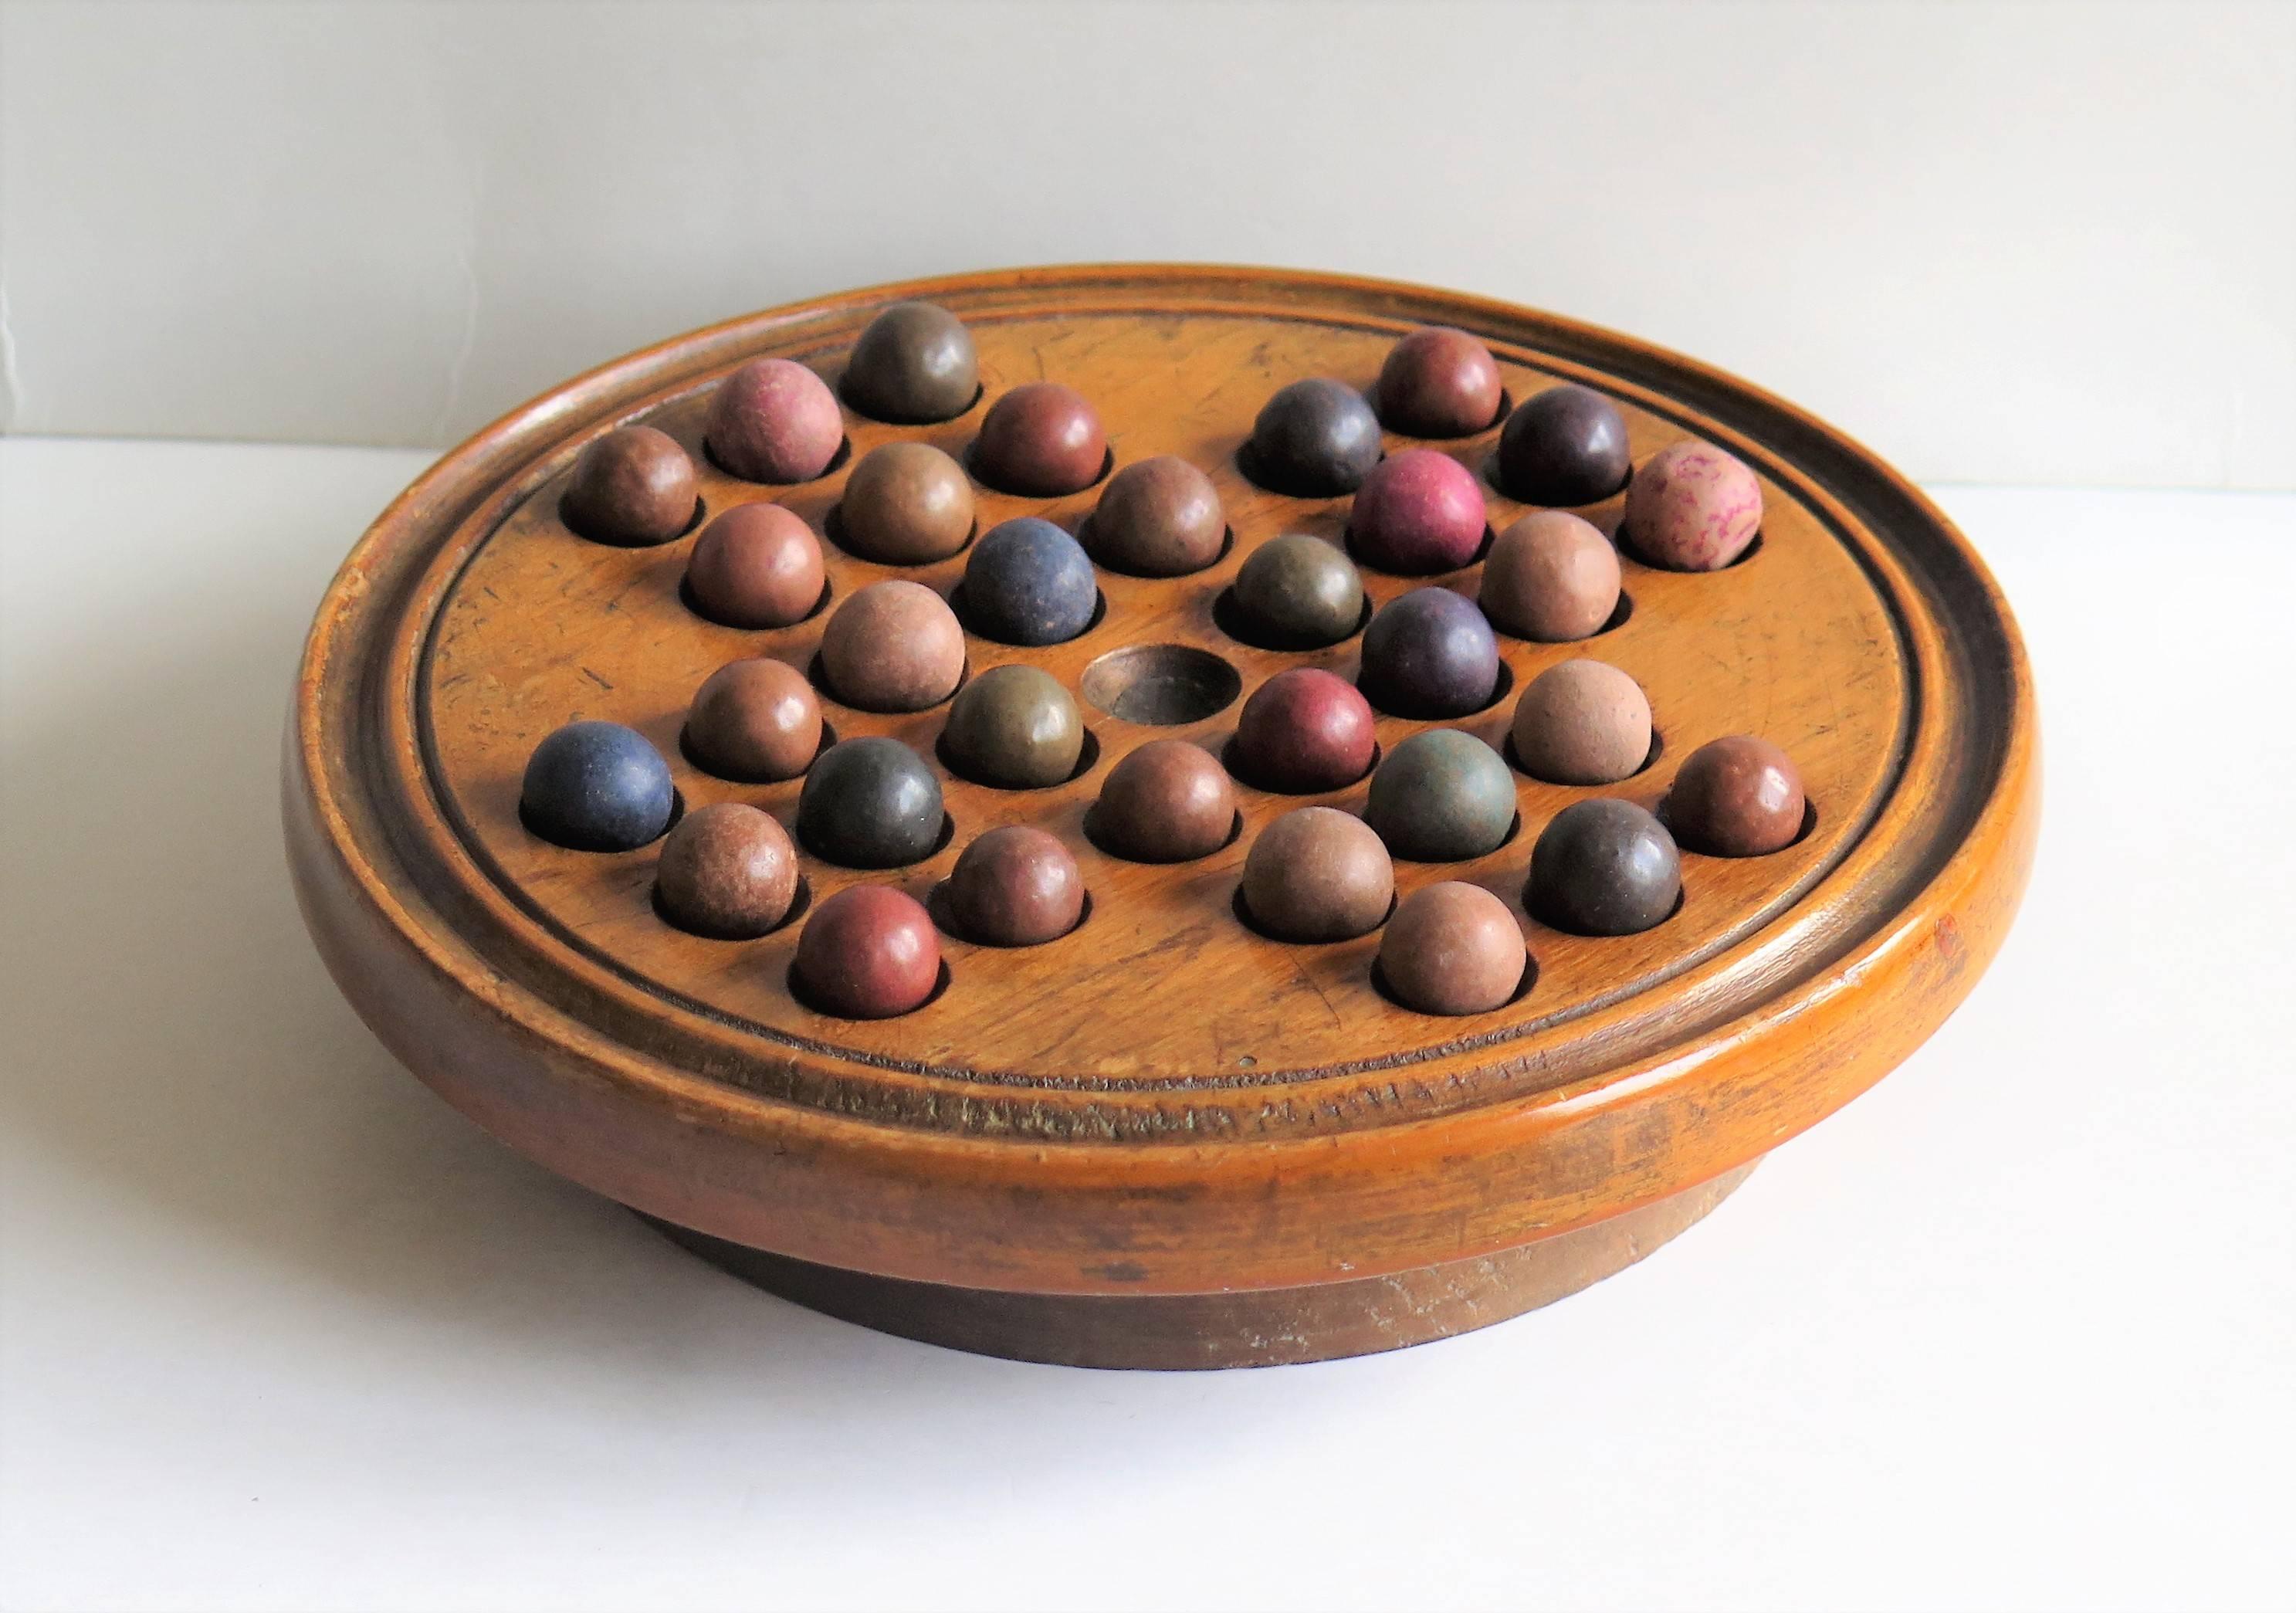 Victorian 19th Century Travelling Solitaire Marble Board Game, with 32 Handmade Marbles